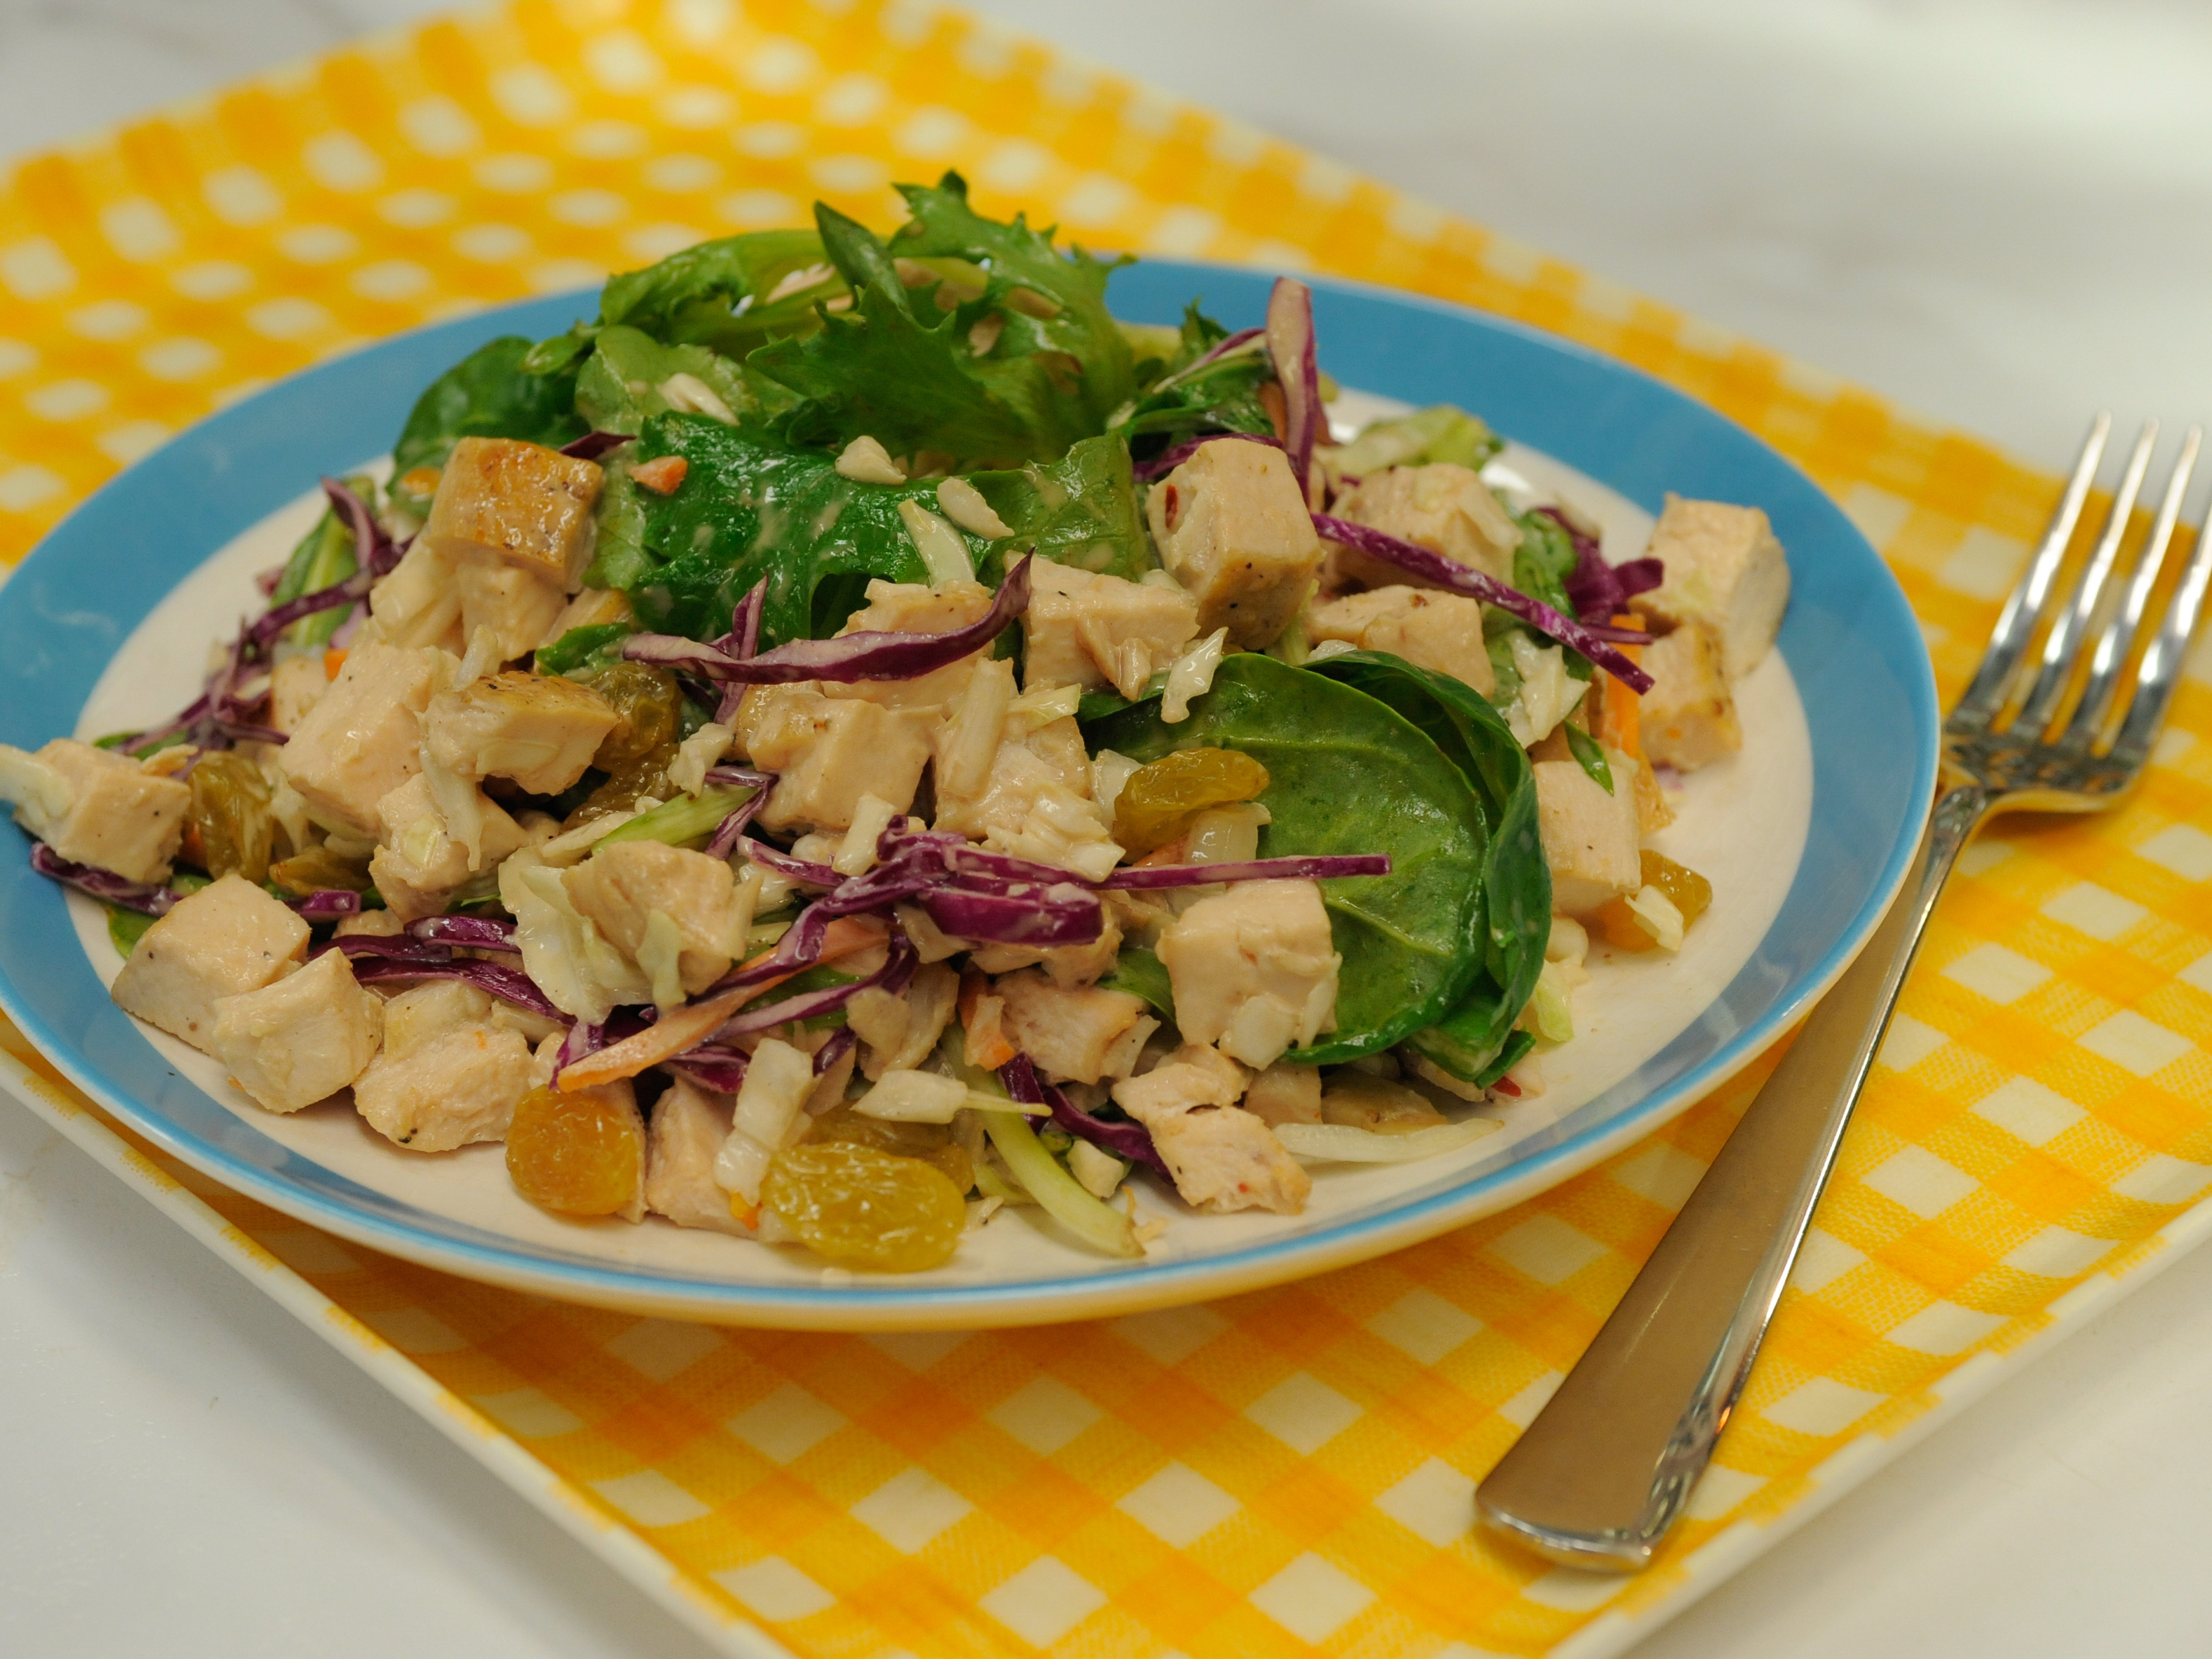 Chinese Chickenless Lunch Box Salad